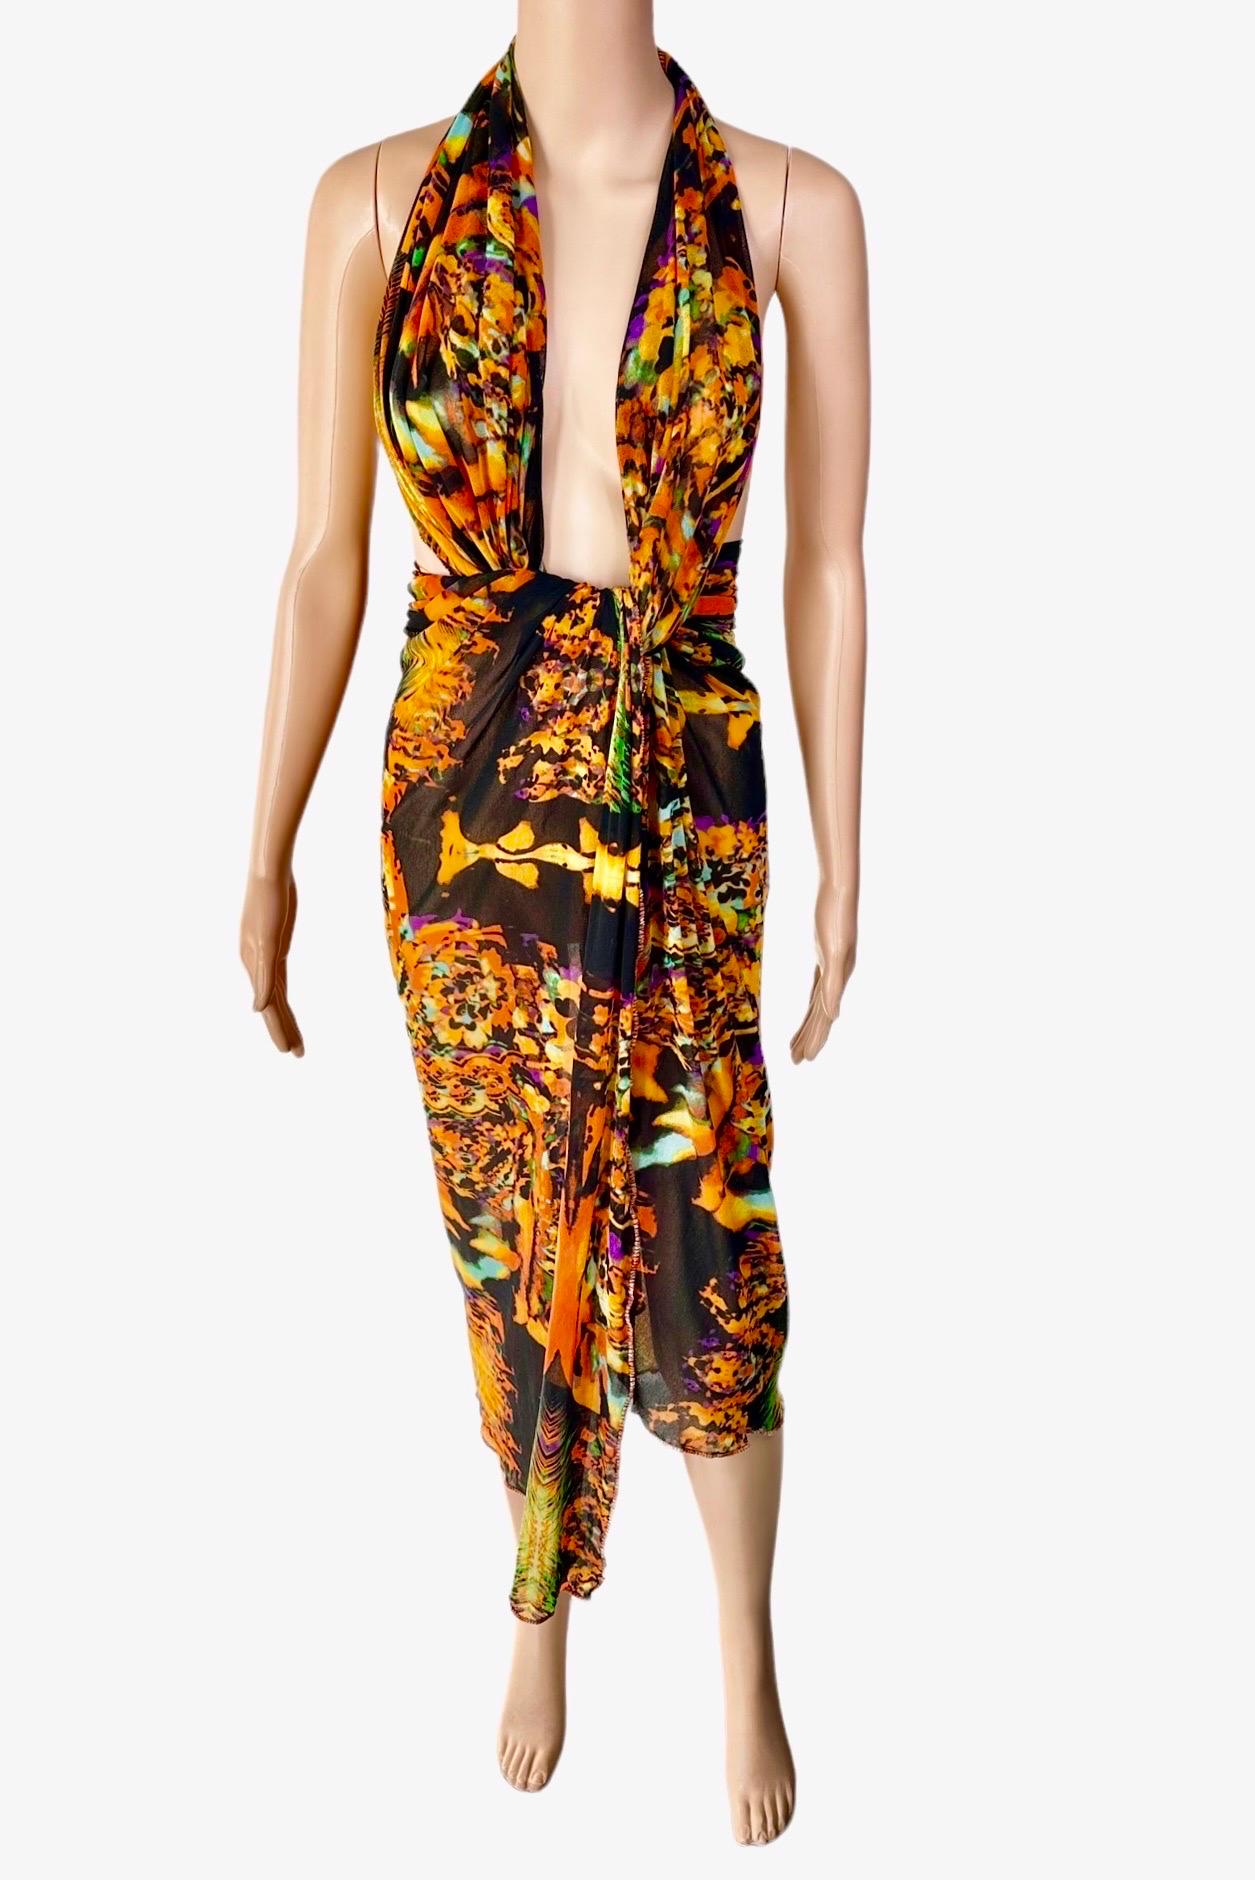 Jean Paul Gaultier S/S 2000 Psychedelic Print Mesh Wrap Dress Scarf Sarong Pareo

Please note this pareo is very versatile and can be styled multiple ways based on preference as seen in photos.

